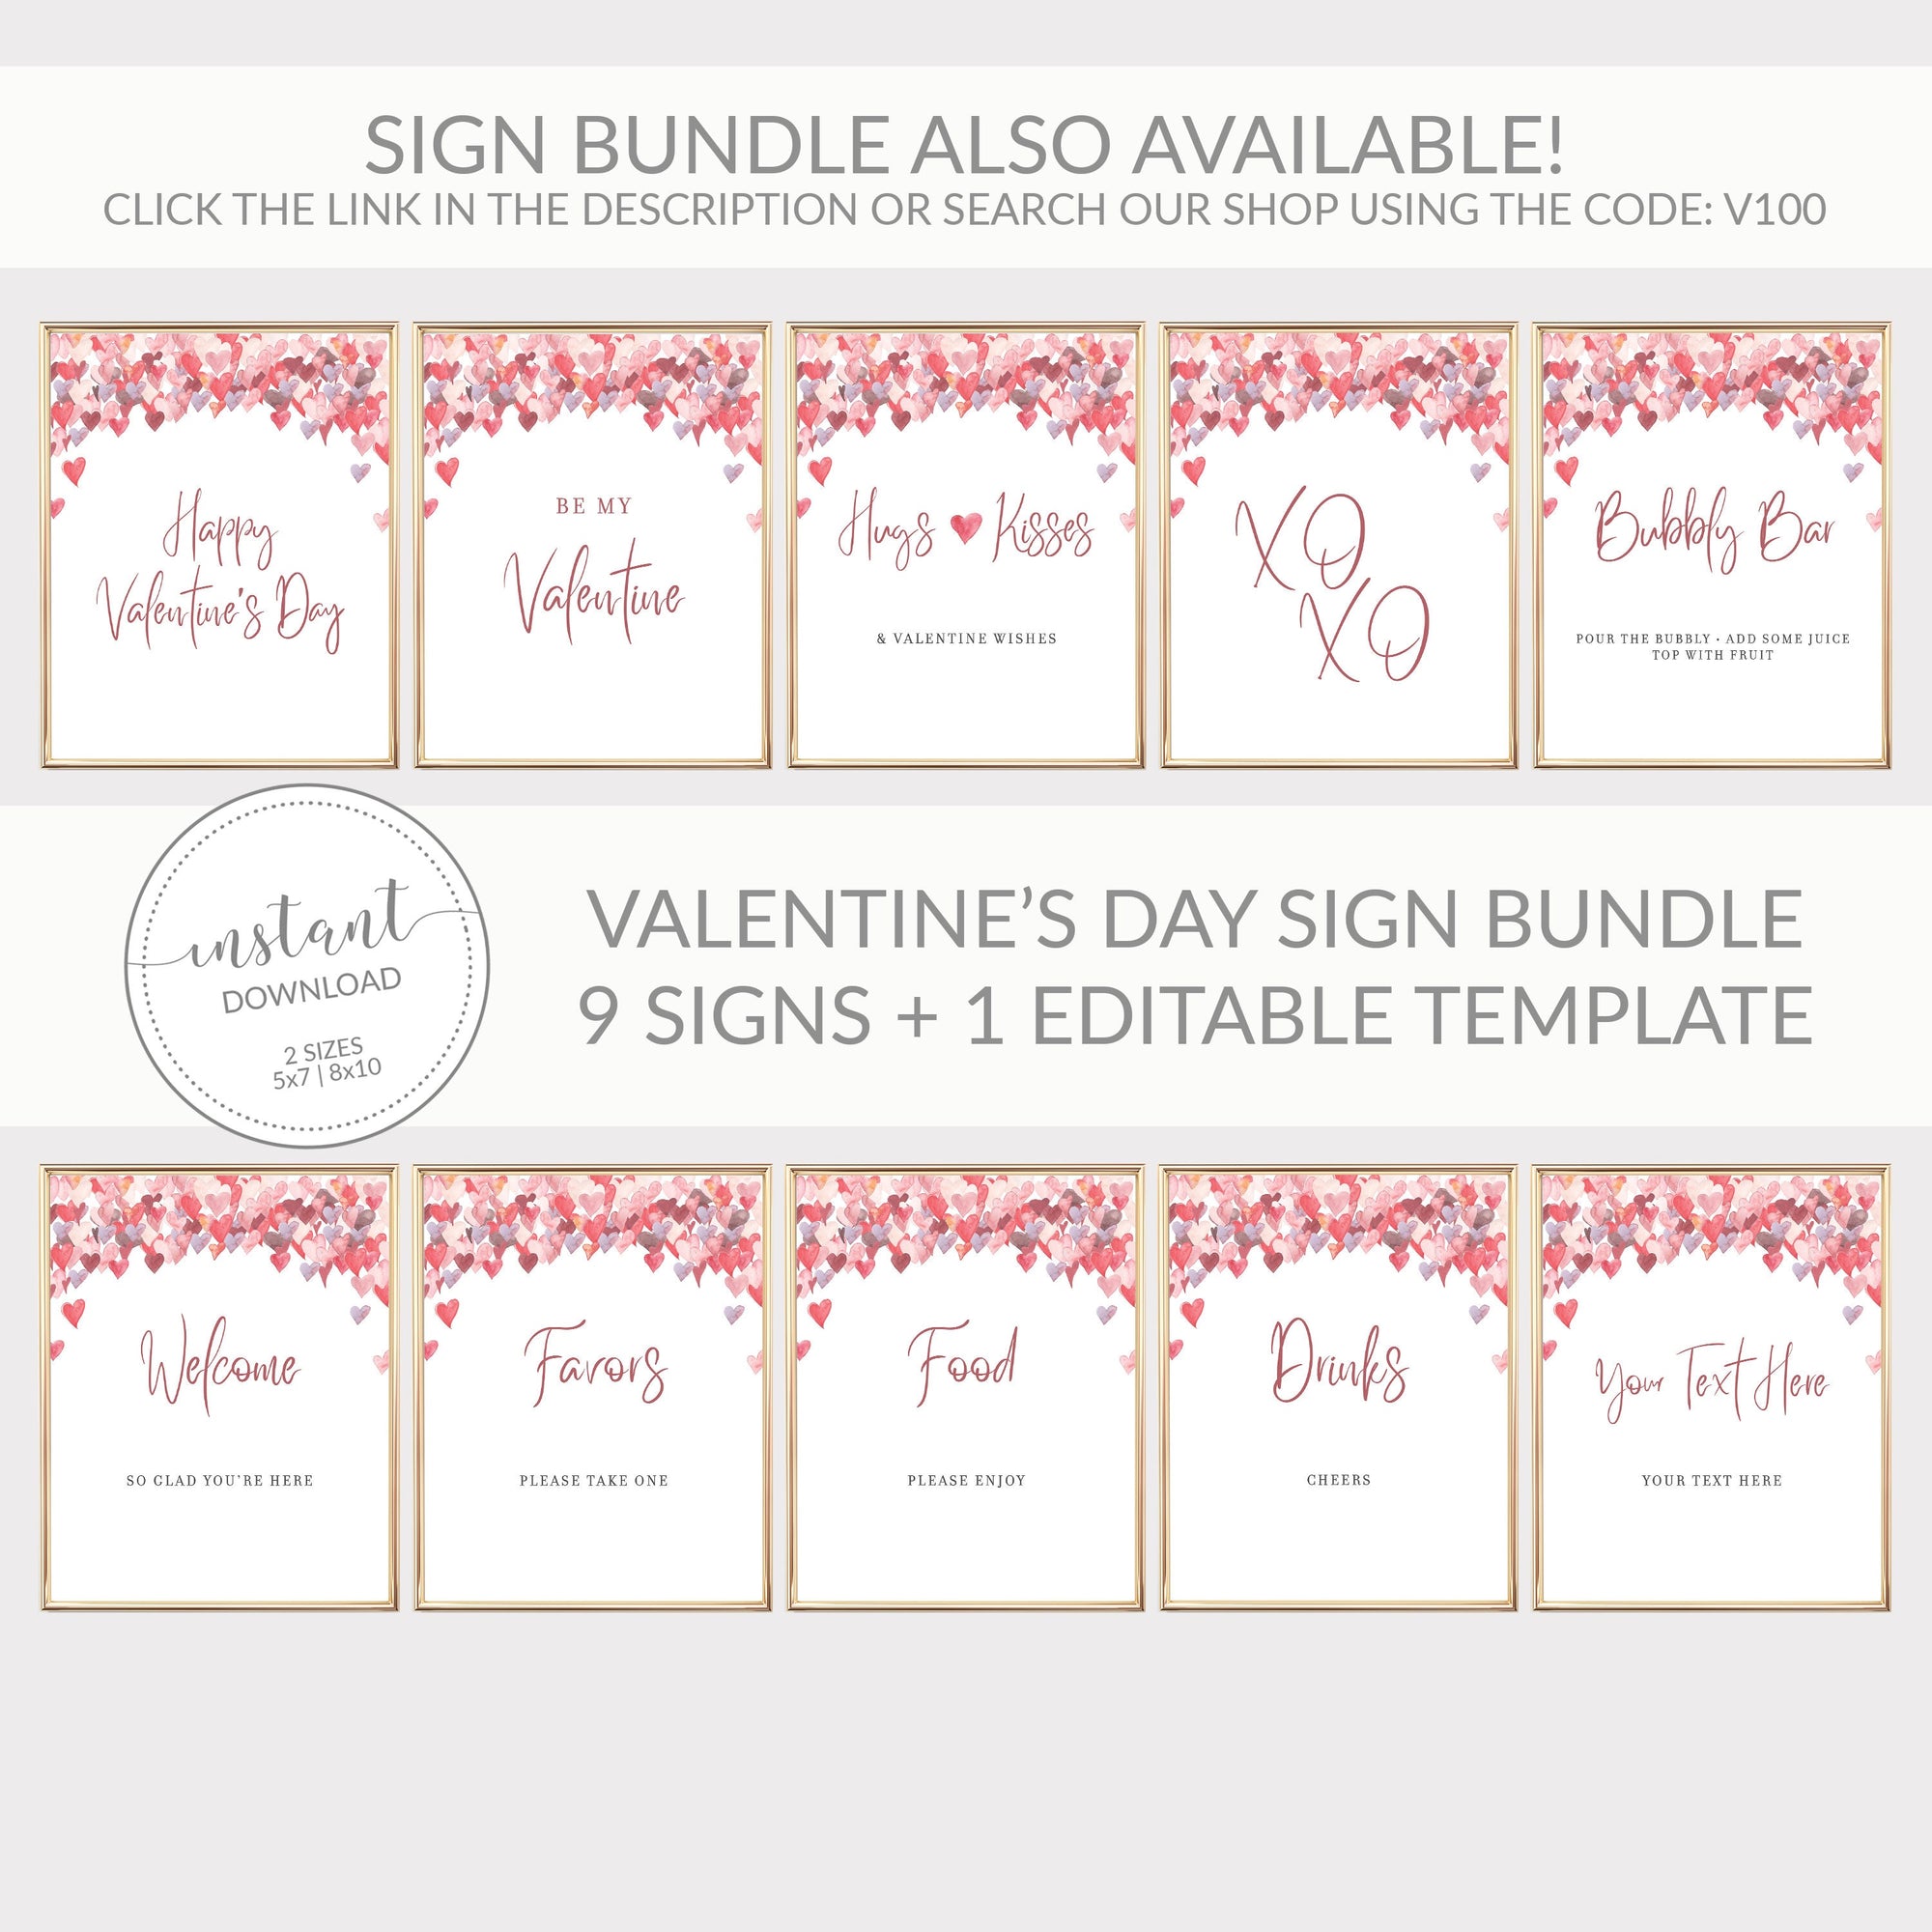 Food Sign Printable, Galentines Day Decor, Valentines Party Decorations, Bridal Shower, Valentine Wedding Table Sign, DIGITAL DOWNLOAD VH100